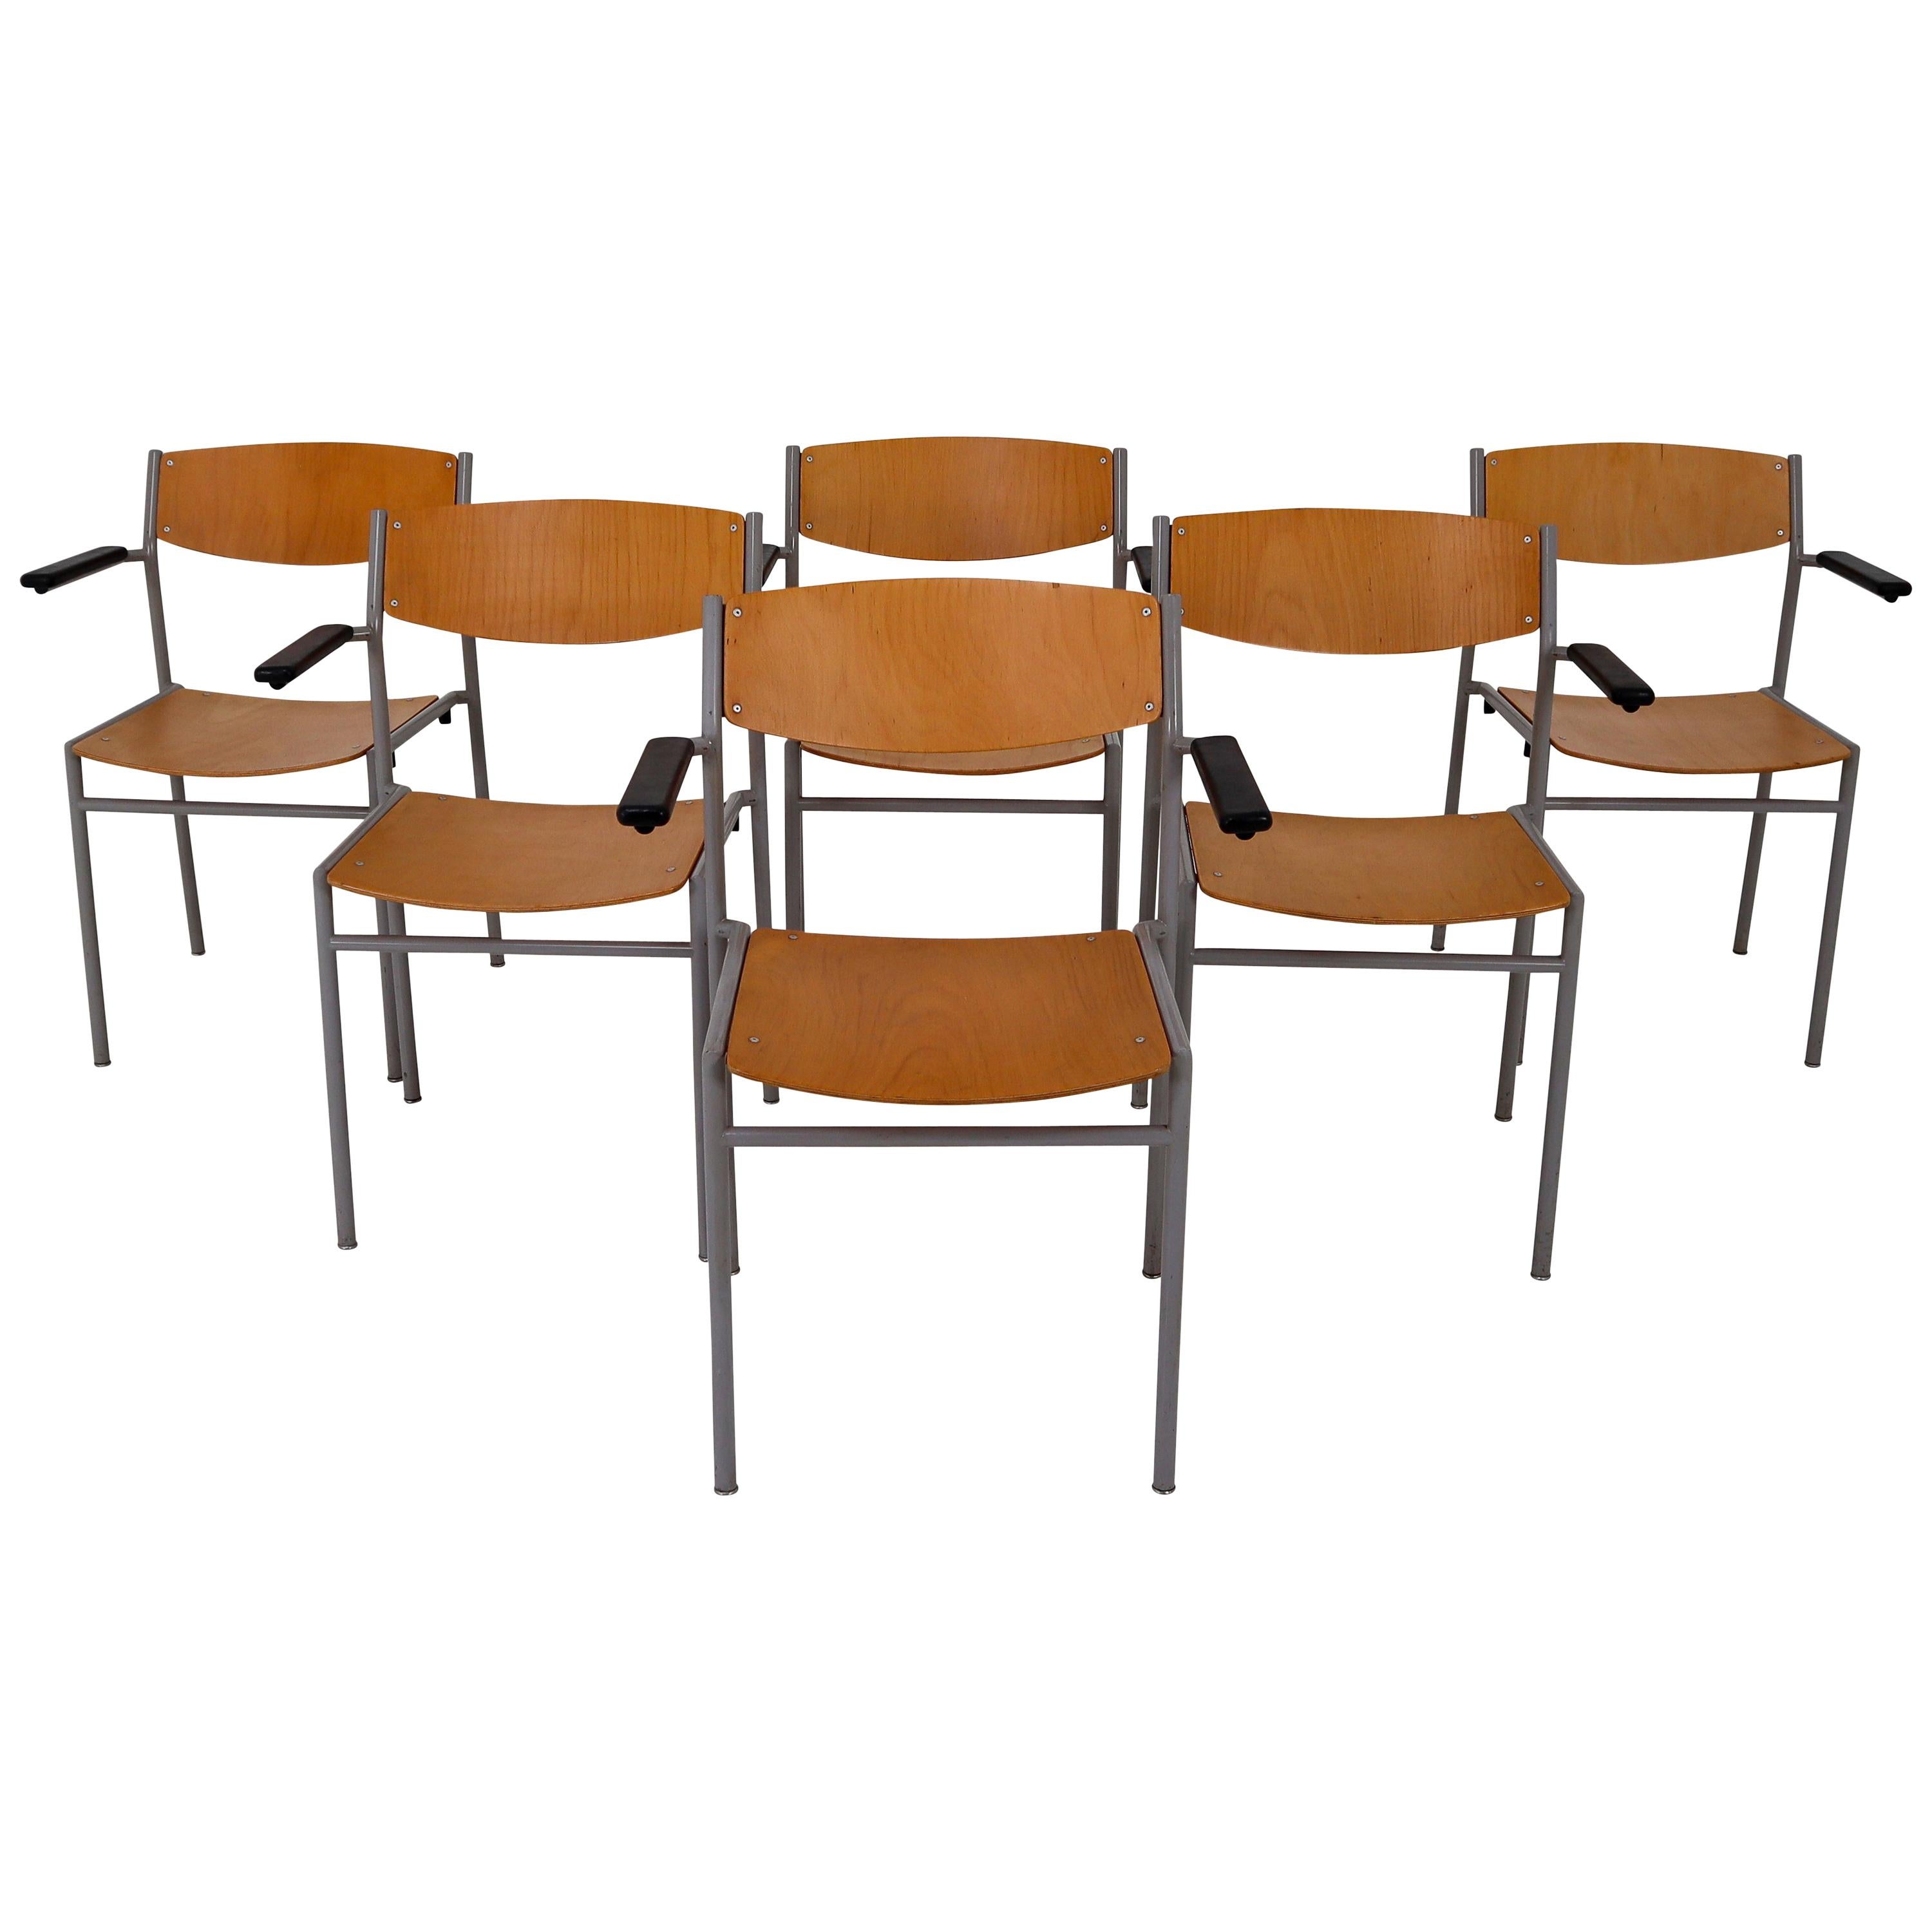 Crazy set of 100 x comfortable industrial plywood chairs, produced in Holland 